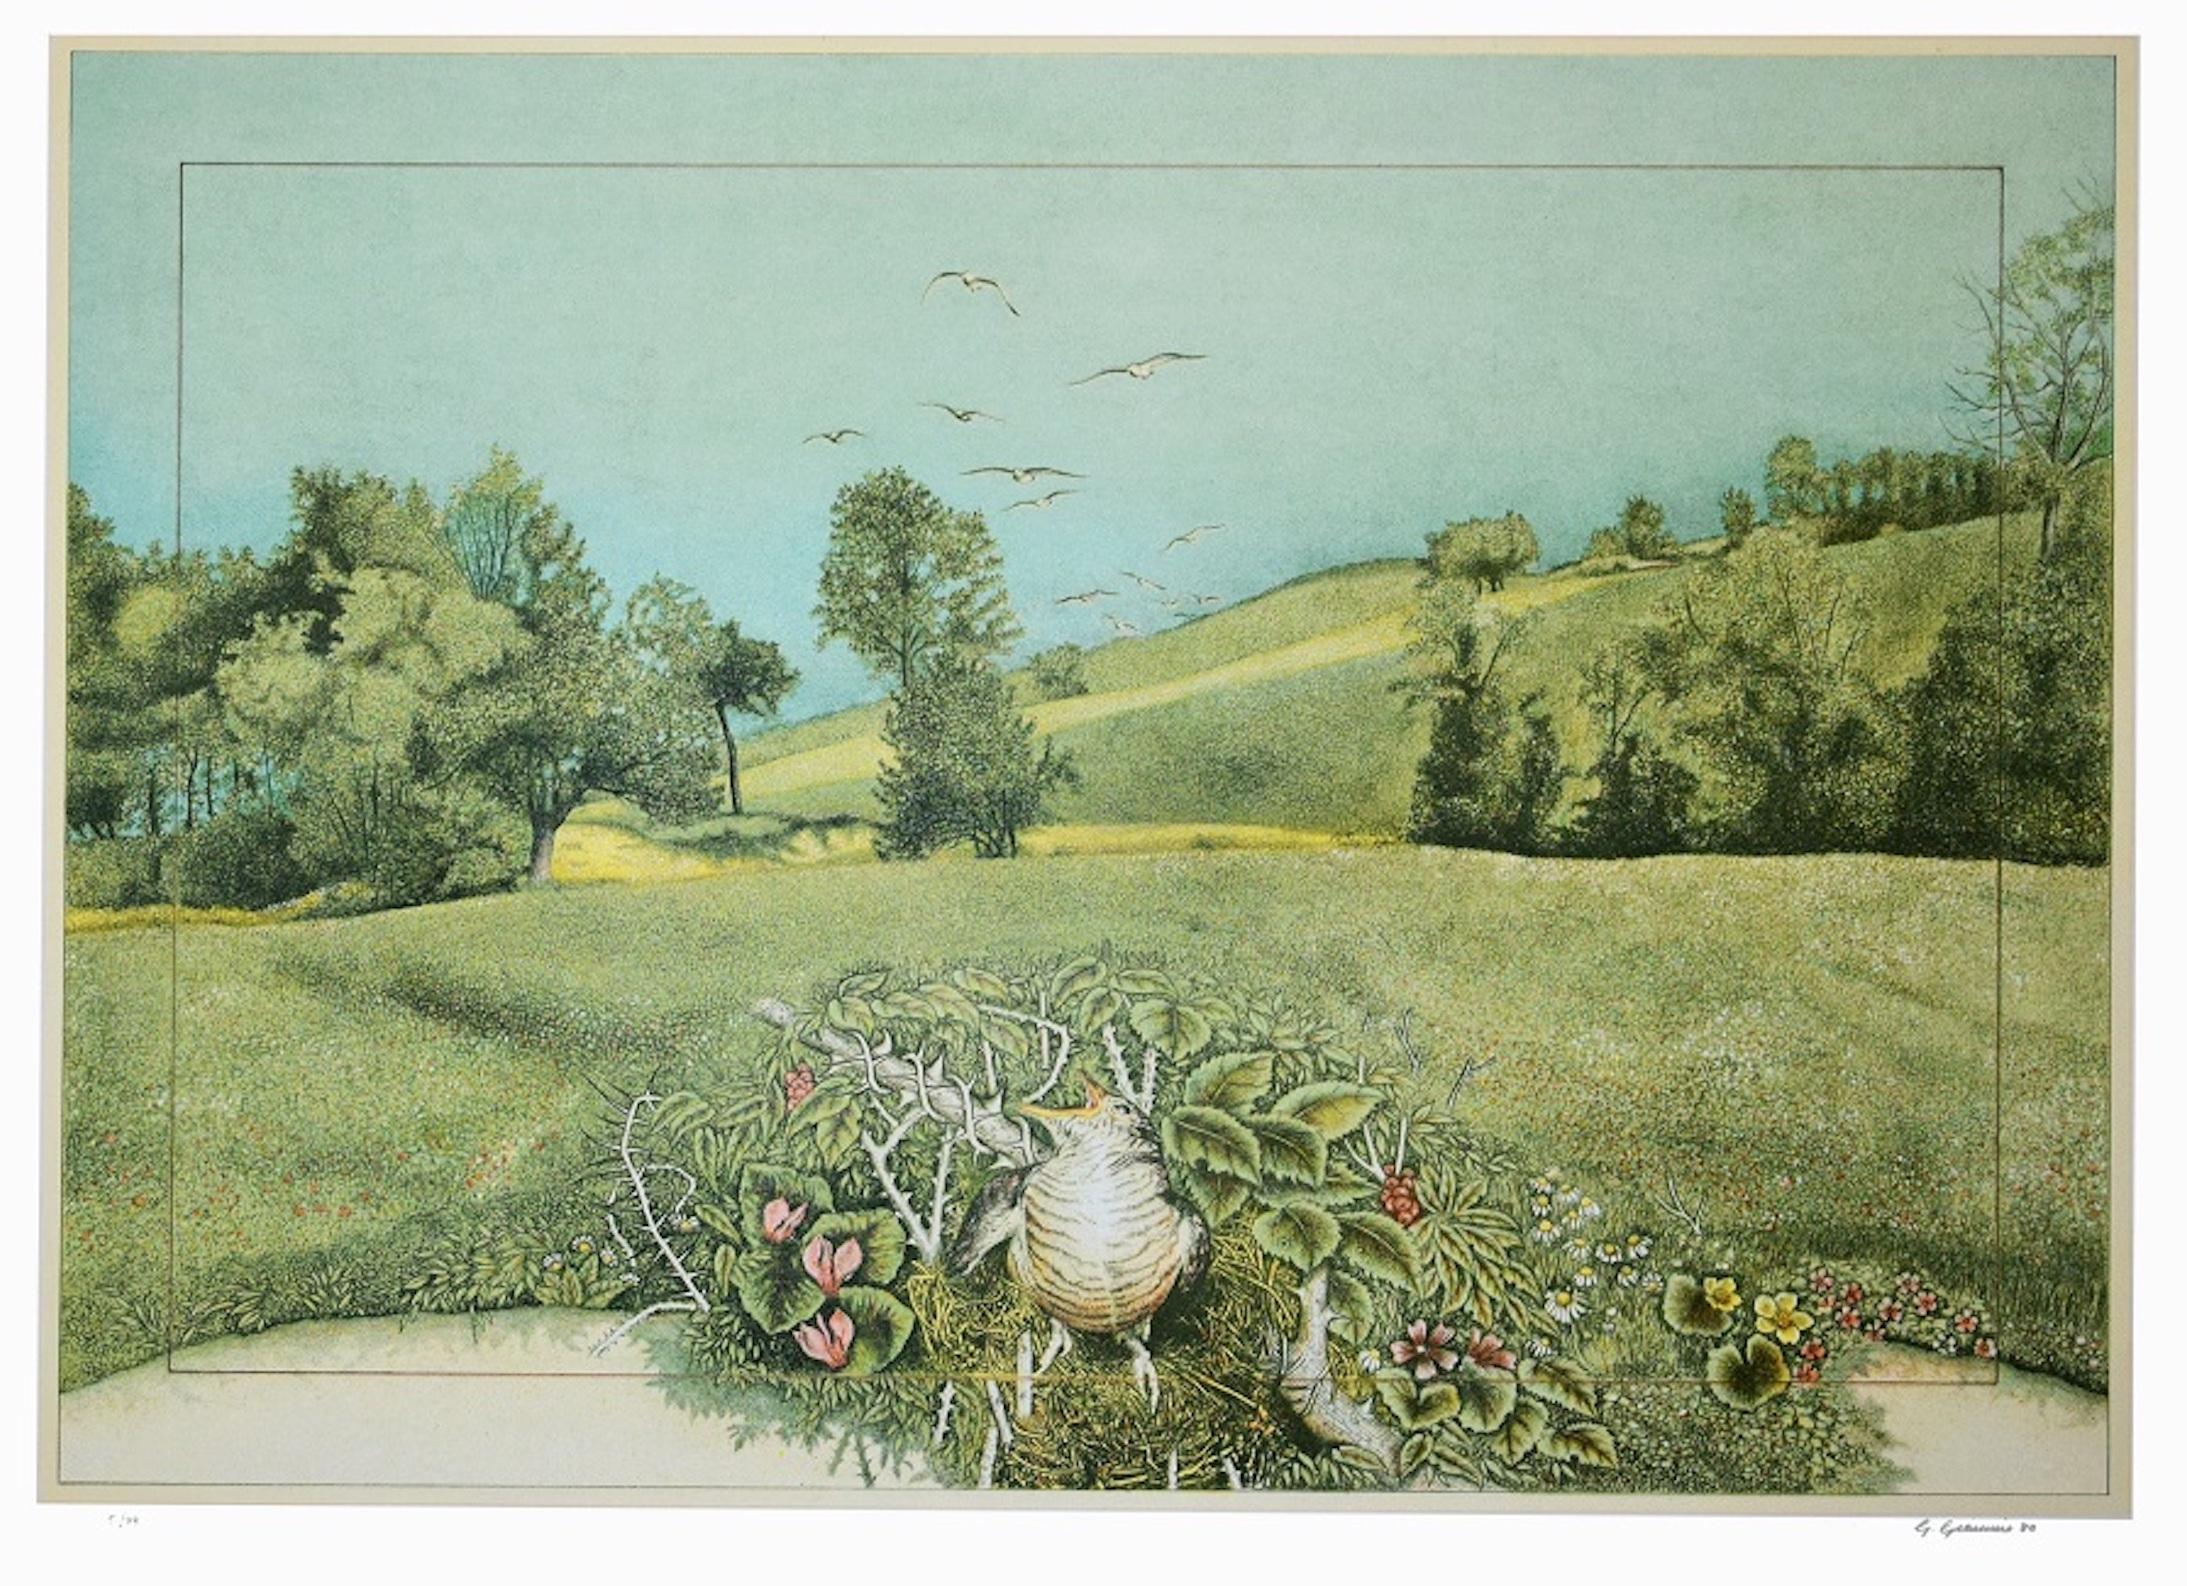 Giuseppe Giannini Landscape Print - Natural Oasis - Lithograph on Silver Paper by G. Giannini - 1980